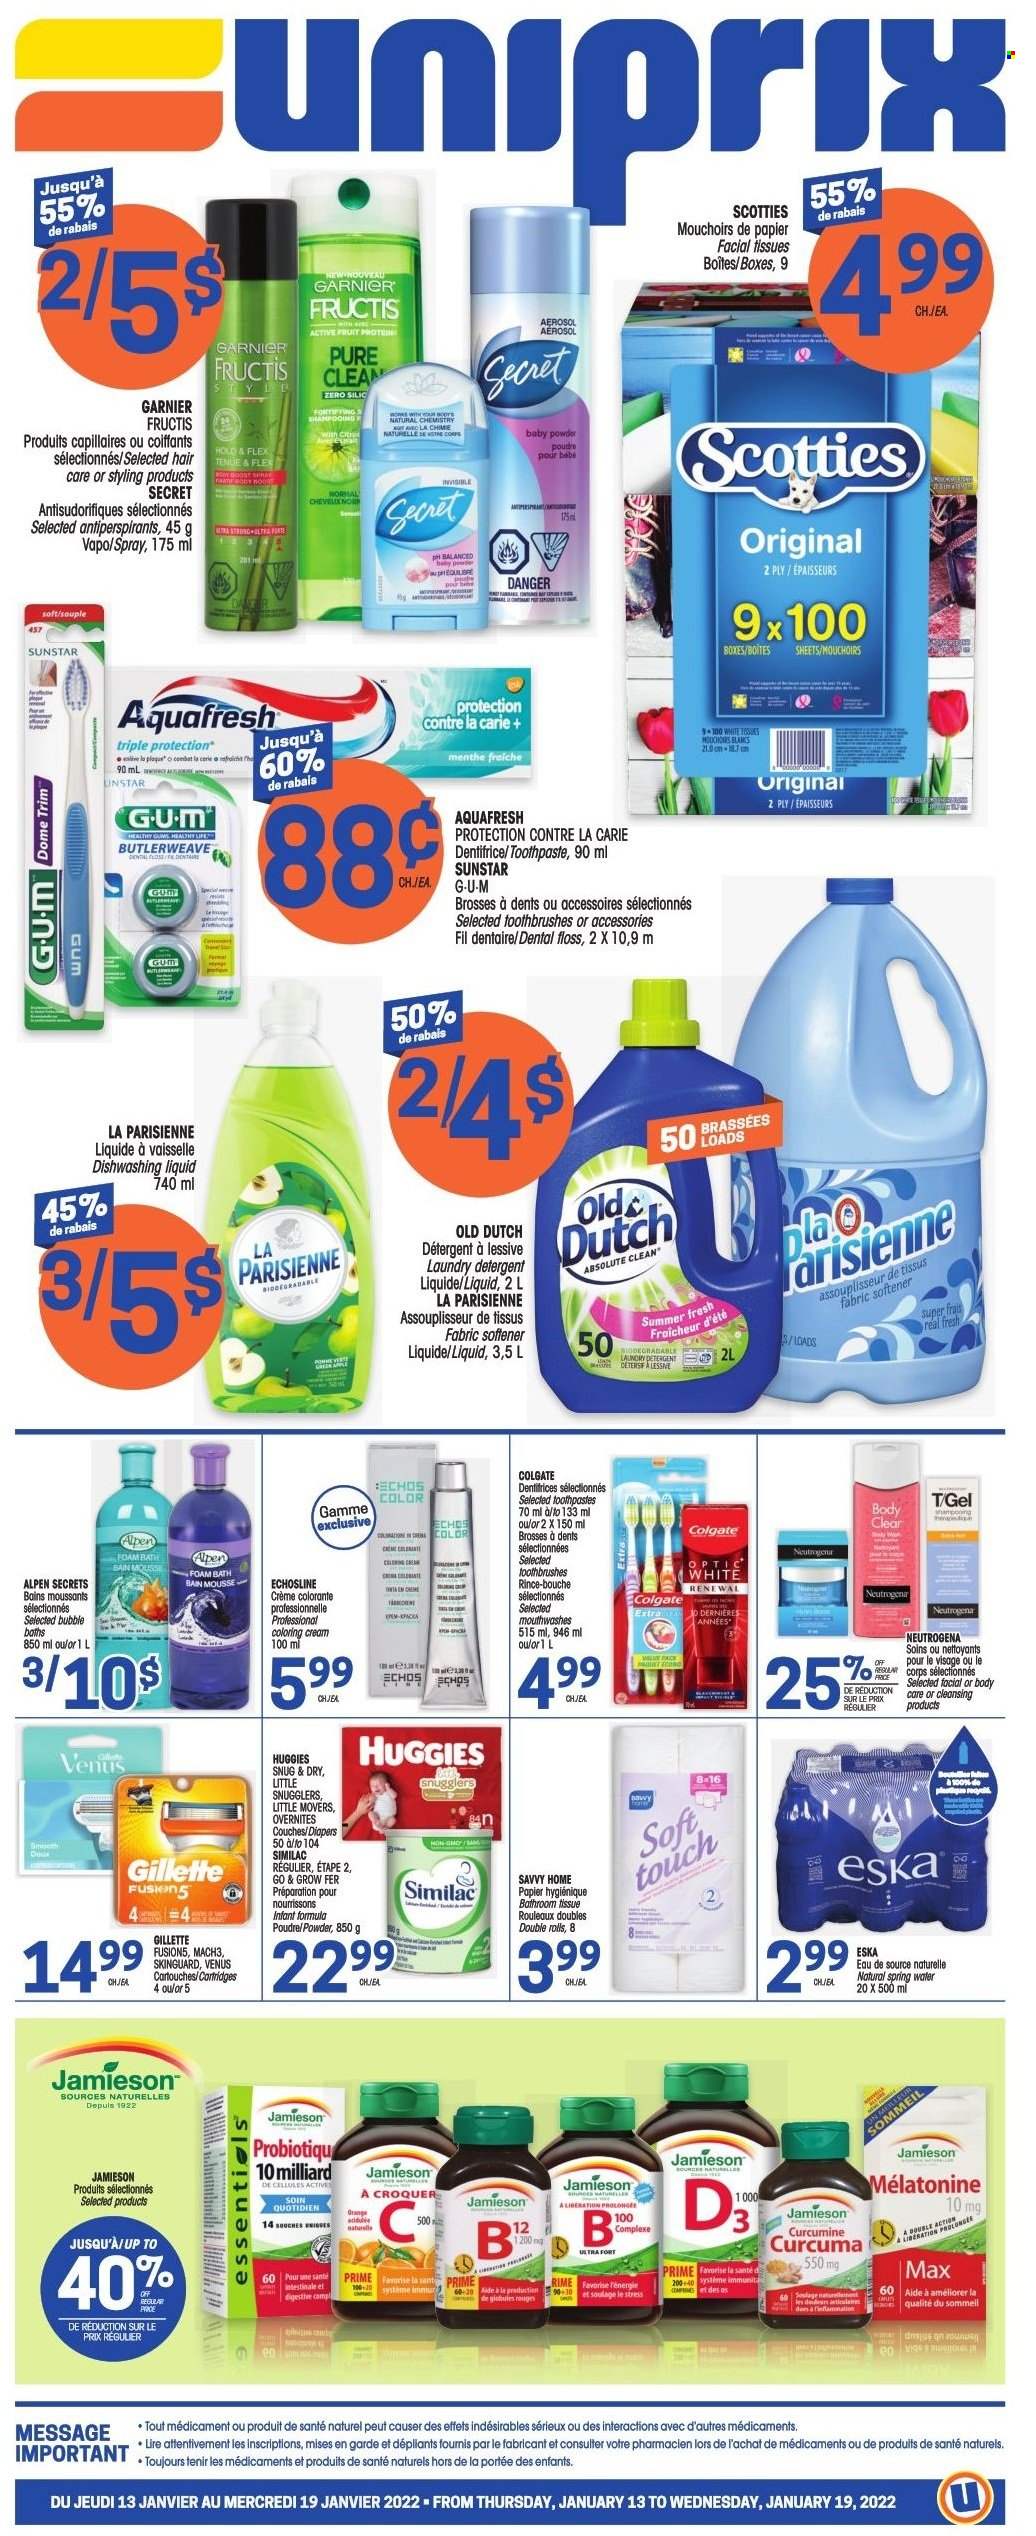 thumbnail - Uniprix Flyer - January 13, 2022 - January 19, 2022 - Sales products - Digestive, spring water, nappies, baby powder, bath tissue, fabric softener, laundry detergent, dishwashing liquid, bath foam, toothpaste, facial tissues, Fructis, Absolute, Venus, detergent, Colgate, Garnier, Gillette, Neutrogena, Huggies. Page 1.